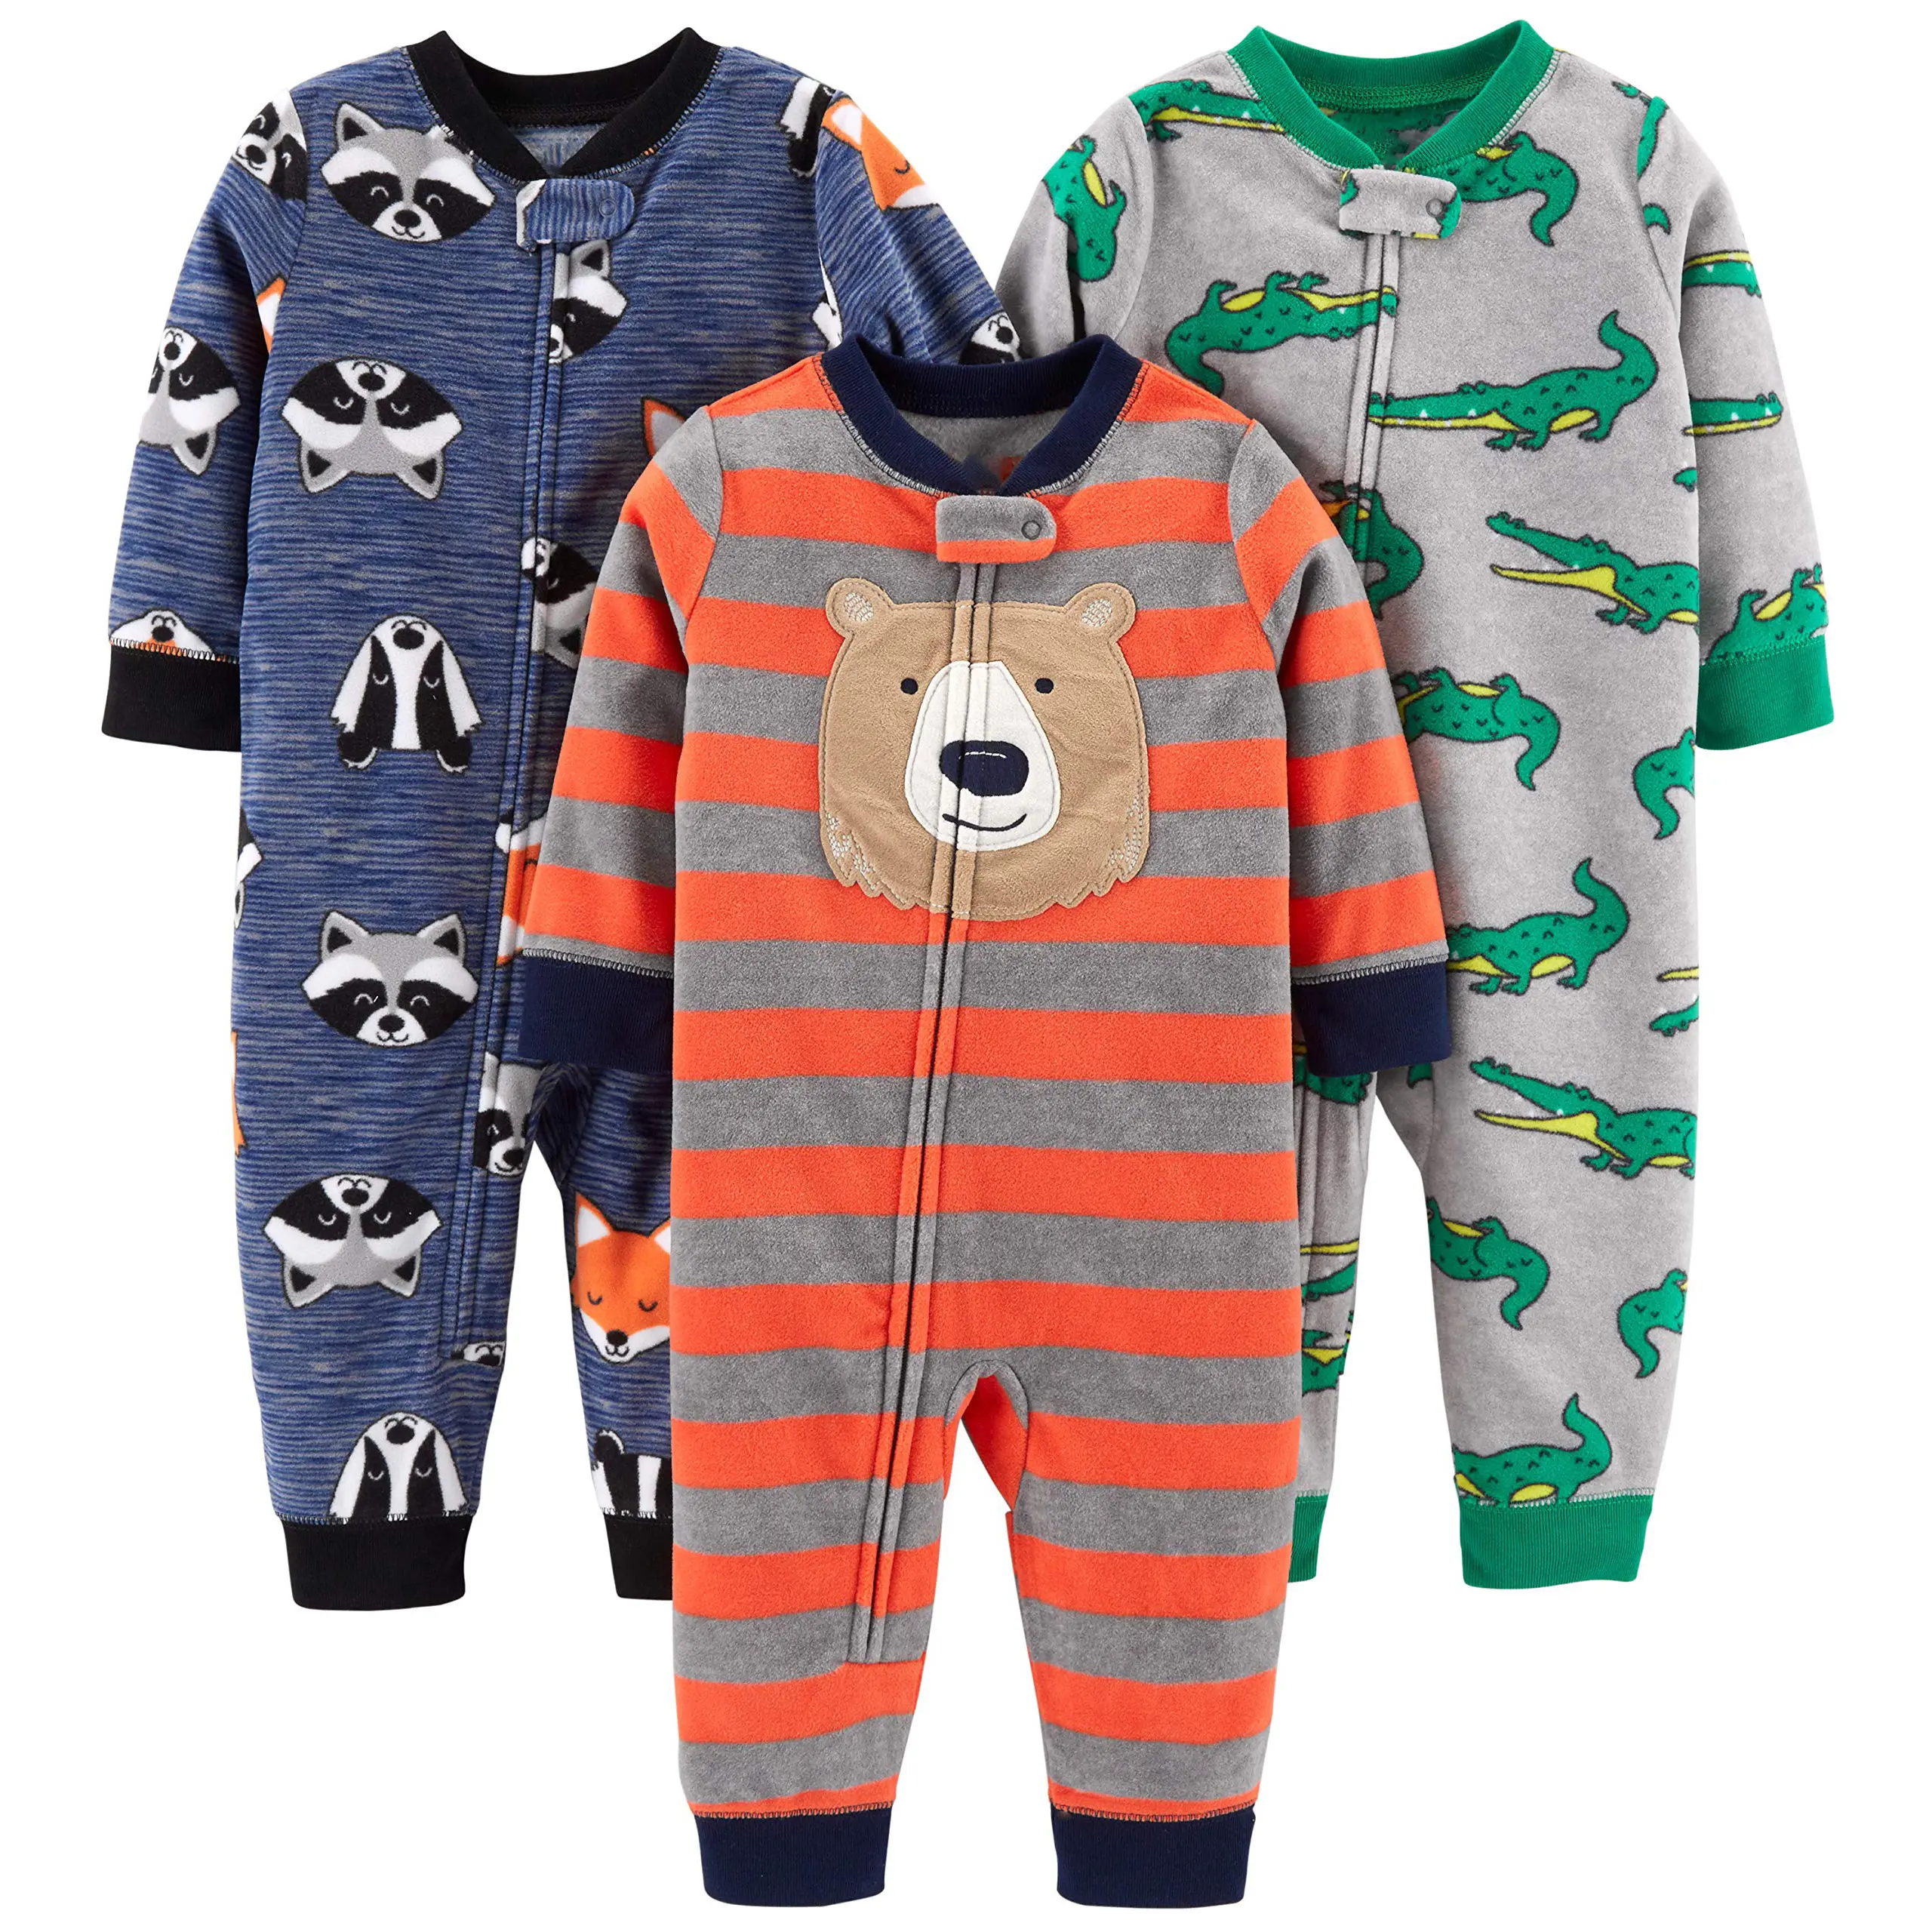 Toddlers and Baby Boys' Loose-Fit Fleece Footless Pajamas, Pack of 3